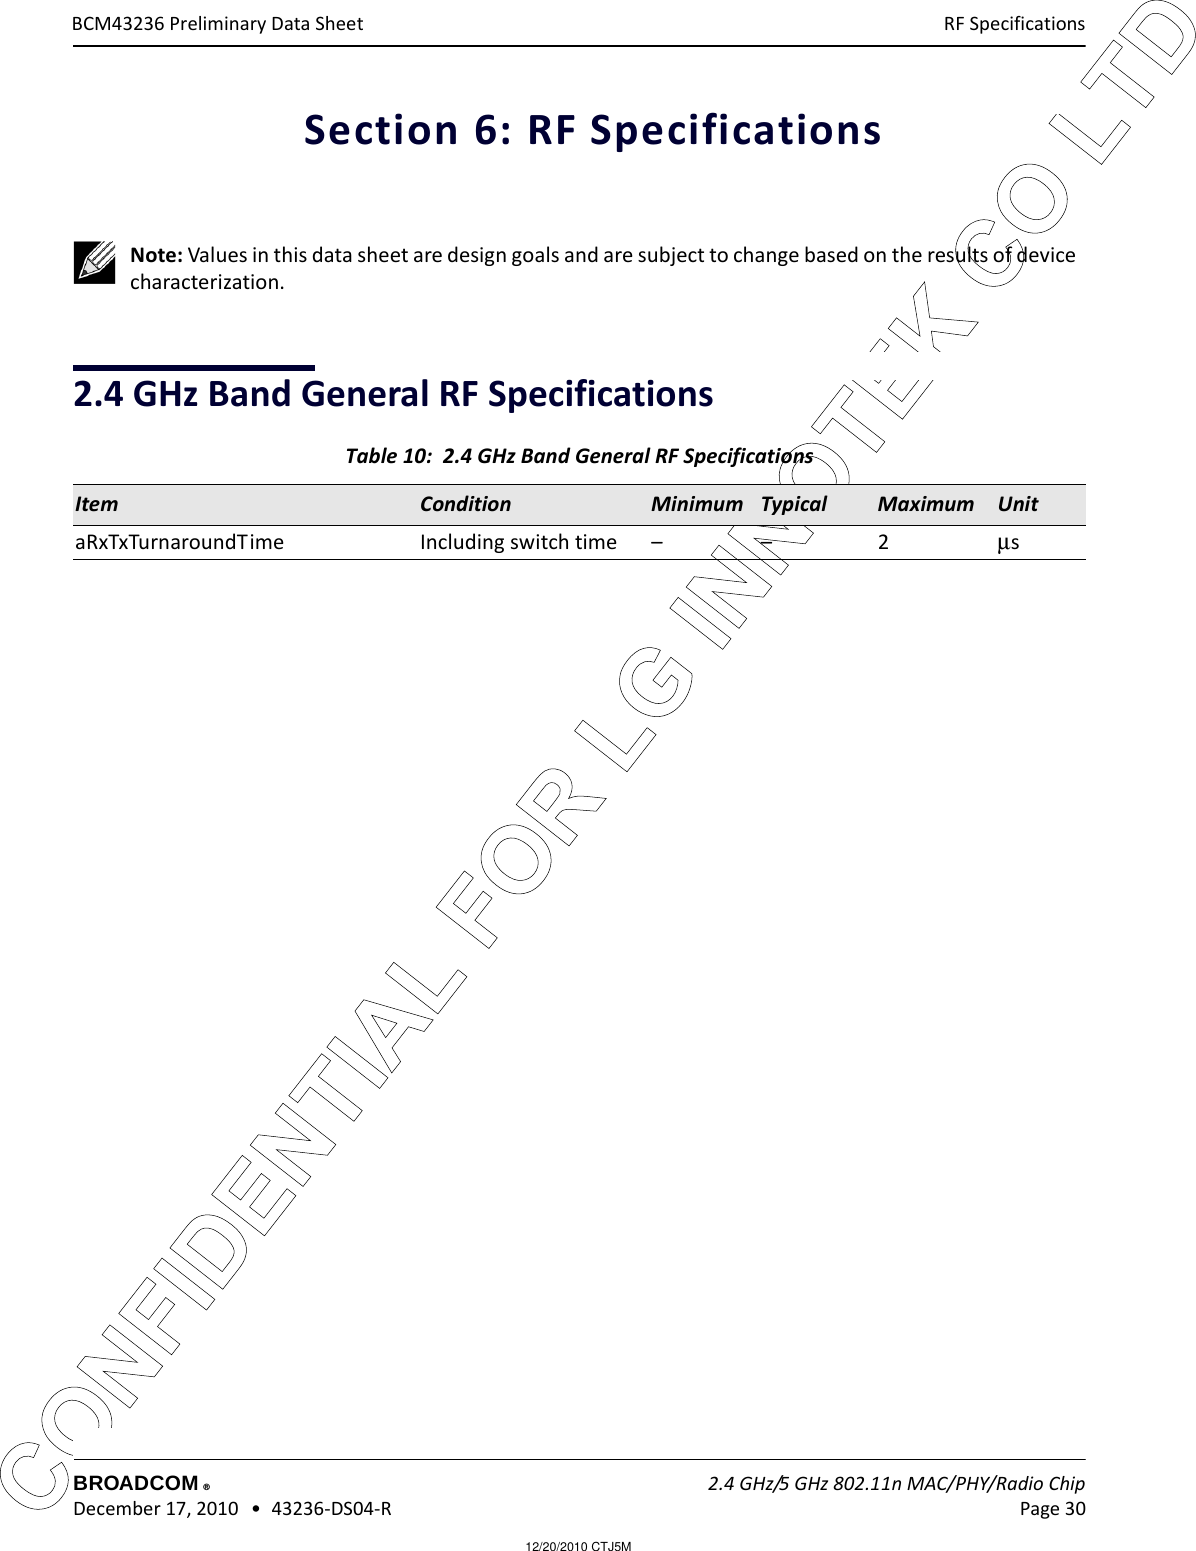 12/20/2010 CTJ5MCONFIDENTIAL FOR LG INNOTEK CO LTD RF SpecificationsBROADCOM    2.4 GHz/5 GHz 802.11n MAC/PHY/Radio Chip December 17, 2010   •  43236-DS04-R Page 30®BCM43236 Preliminary Data SheetSection 6: RF Specifications2.4 GHz Band General RF SpecificationsNote: Values in this data sheet are design goals and are subject to change based on the results of device characterization.Table 10:  2.4 GHz Band General RF Specifications Item Condition Minimum Typical  Maximum UnitaRxTxTurnaroundTime Including switch time – – 2 μs